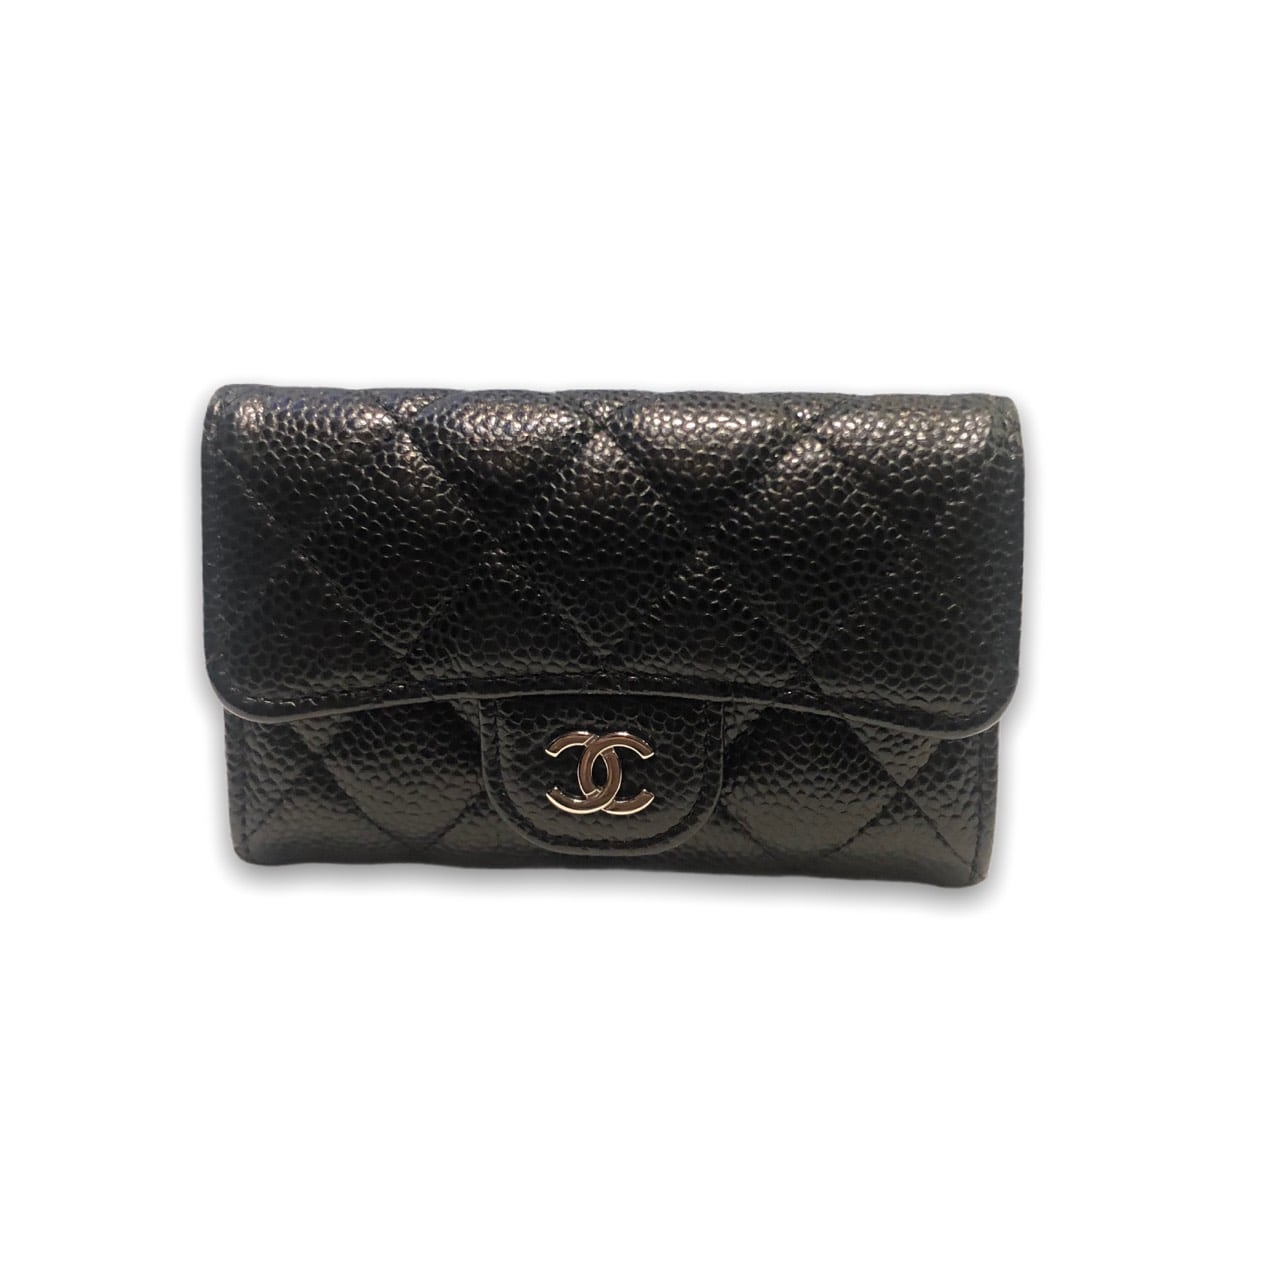 Used like new! Chanel Card holder Black caviar with silver hardware Holo 29